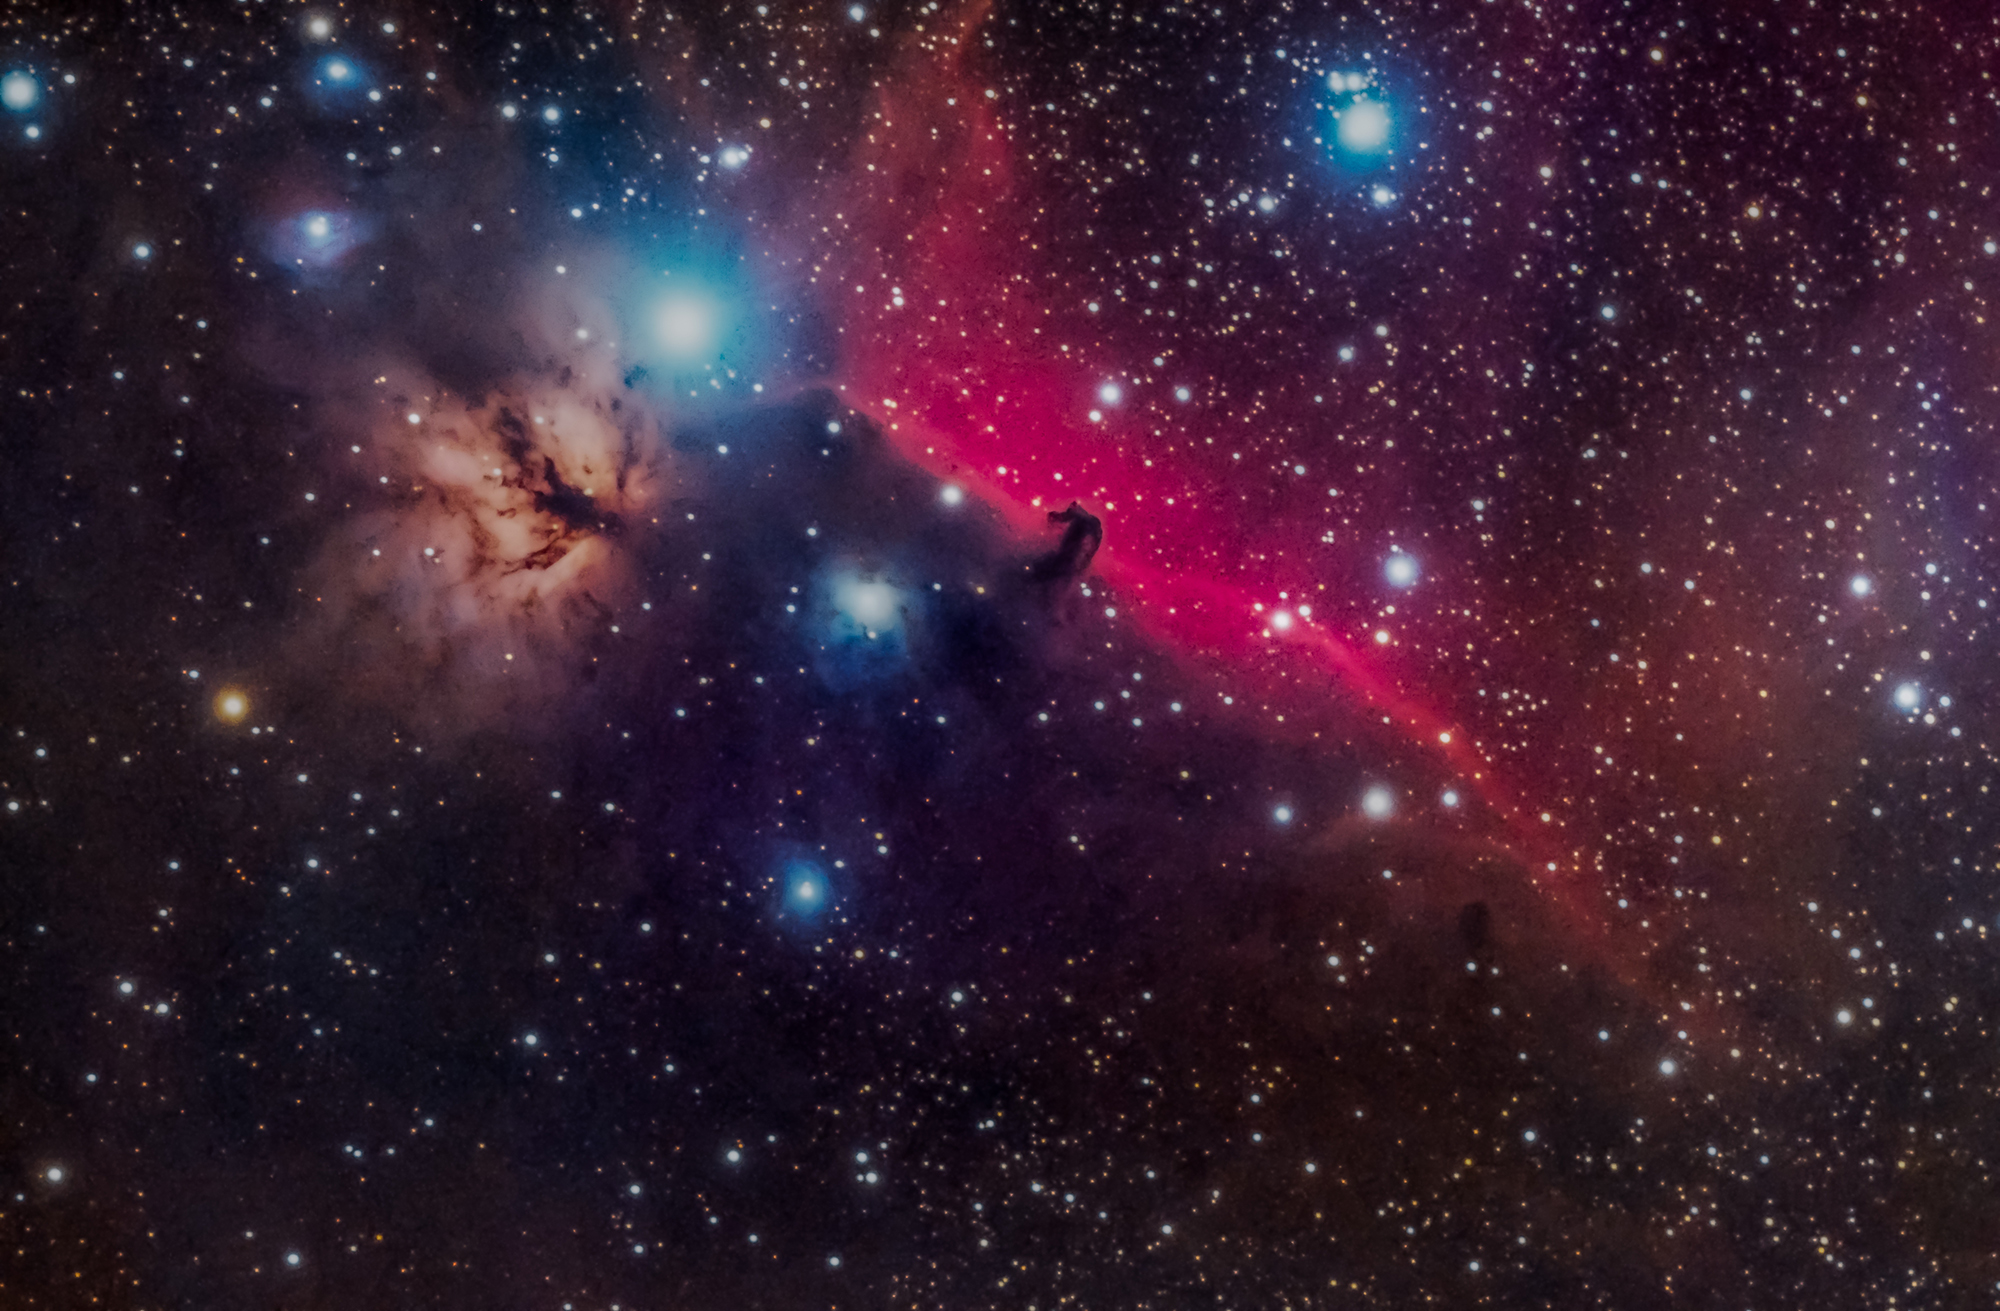 Horsehead Nebula and other celestial objects